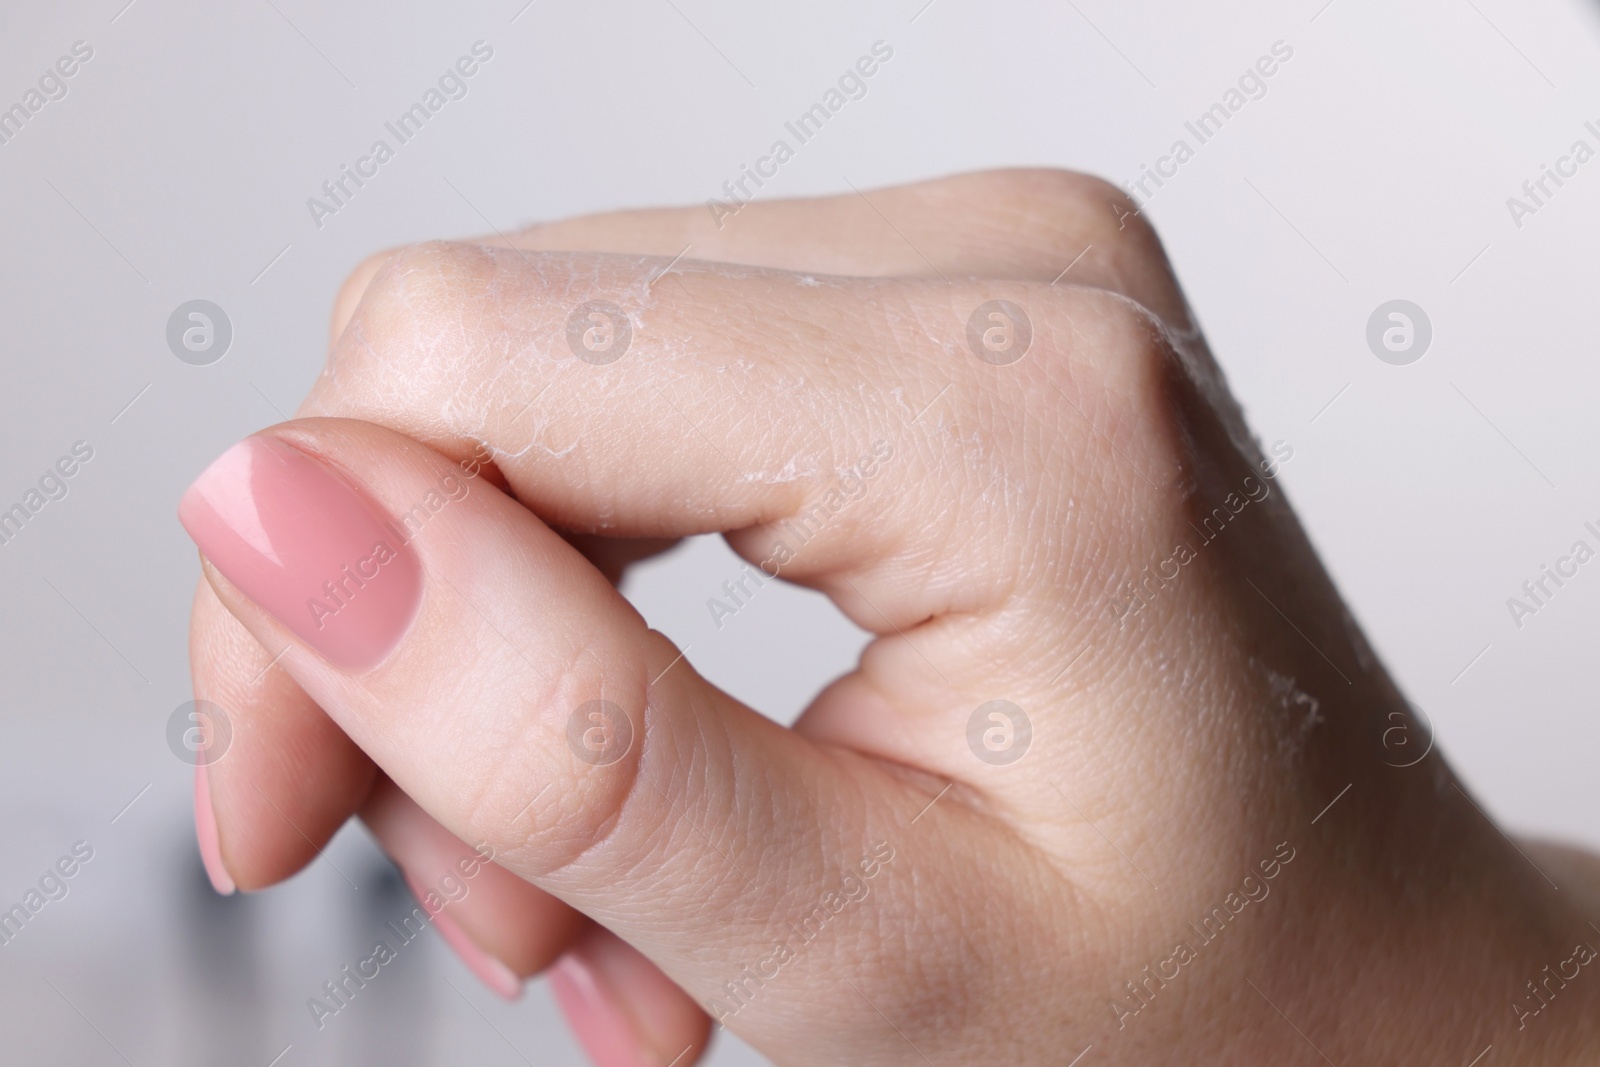 Photo of Woman with dry skin on hand against light background, macro view